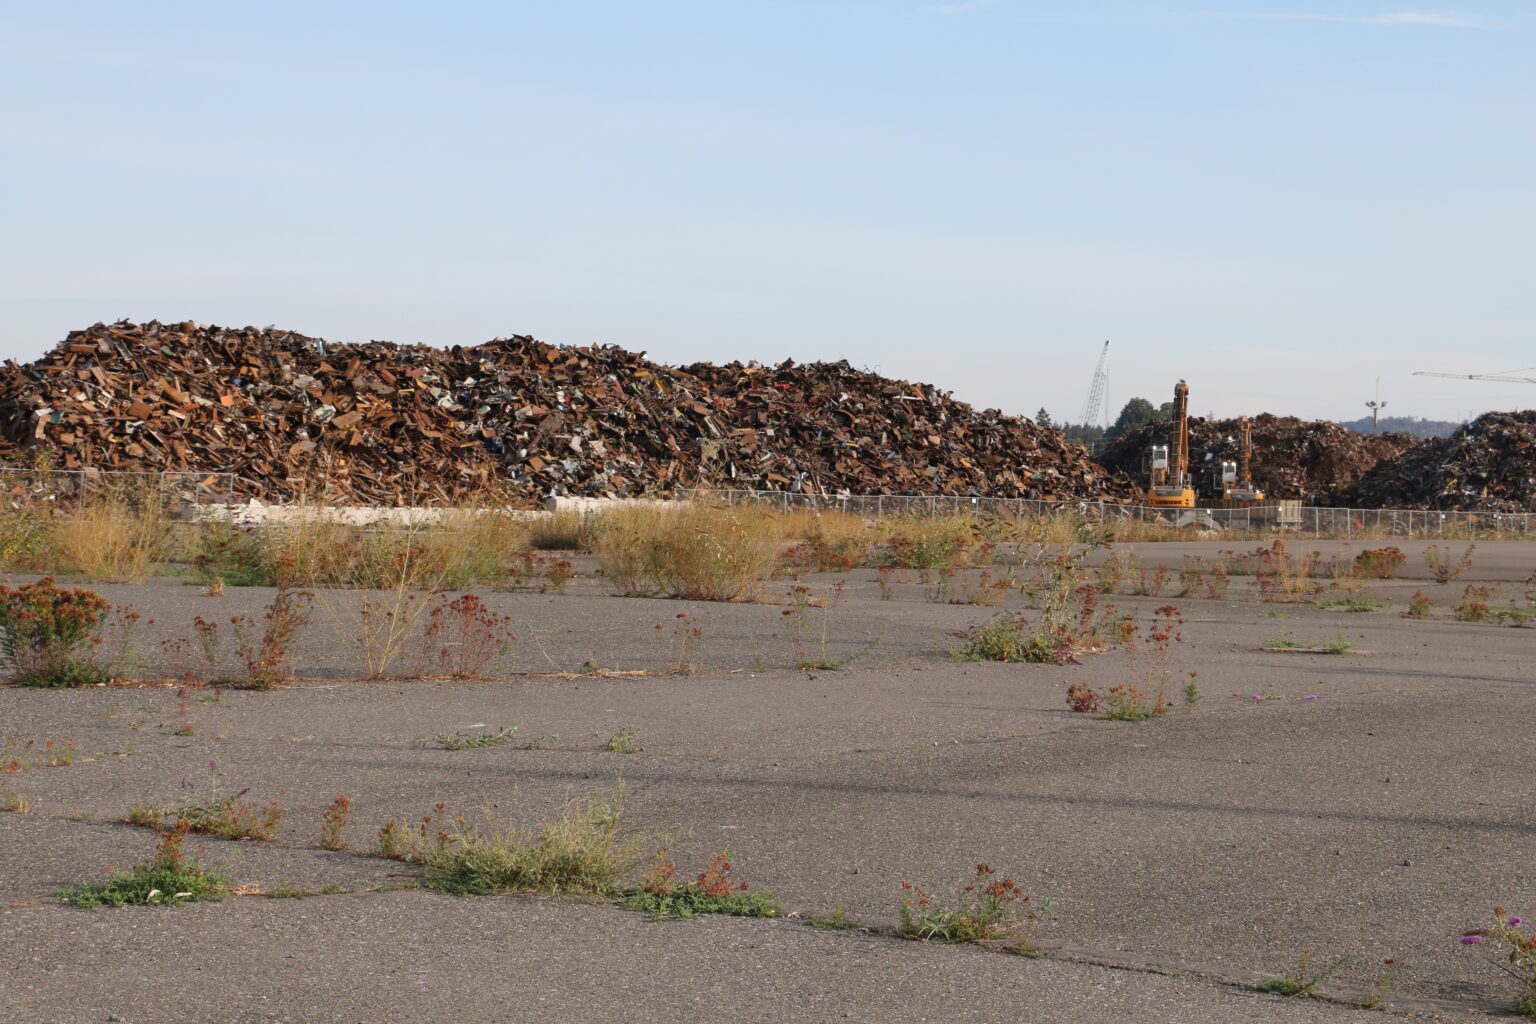 Piles of scrap metal await export at Bellingham Shipping Terminal in September 2022. ABC Recycling of British Columbia has been storing the metal on the waterfront since July and nearby residents have complained about the noise.